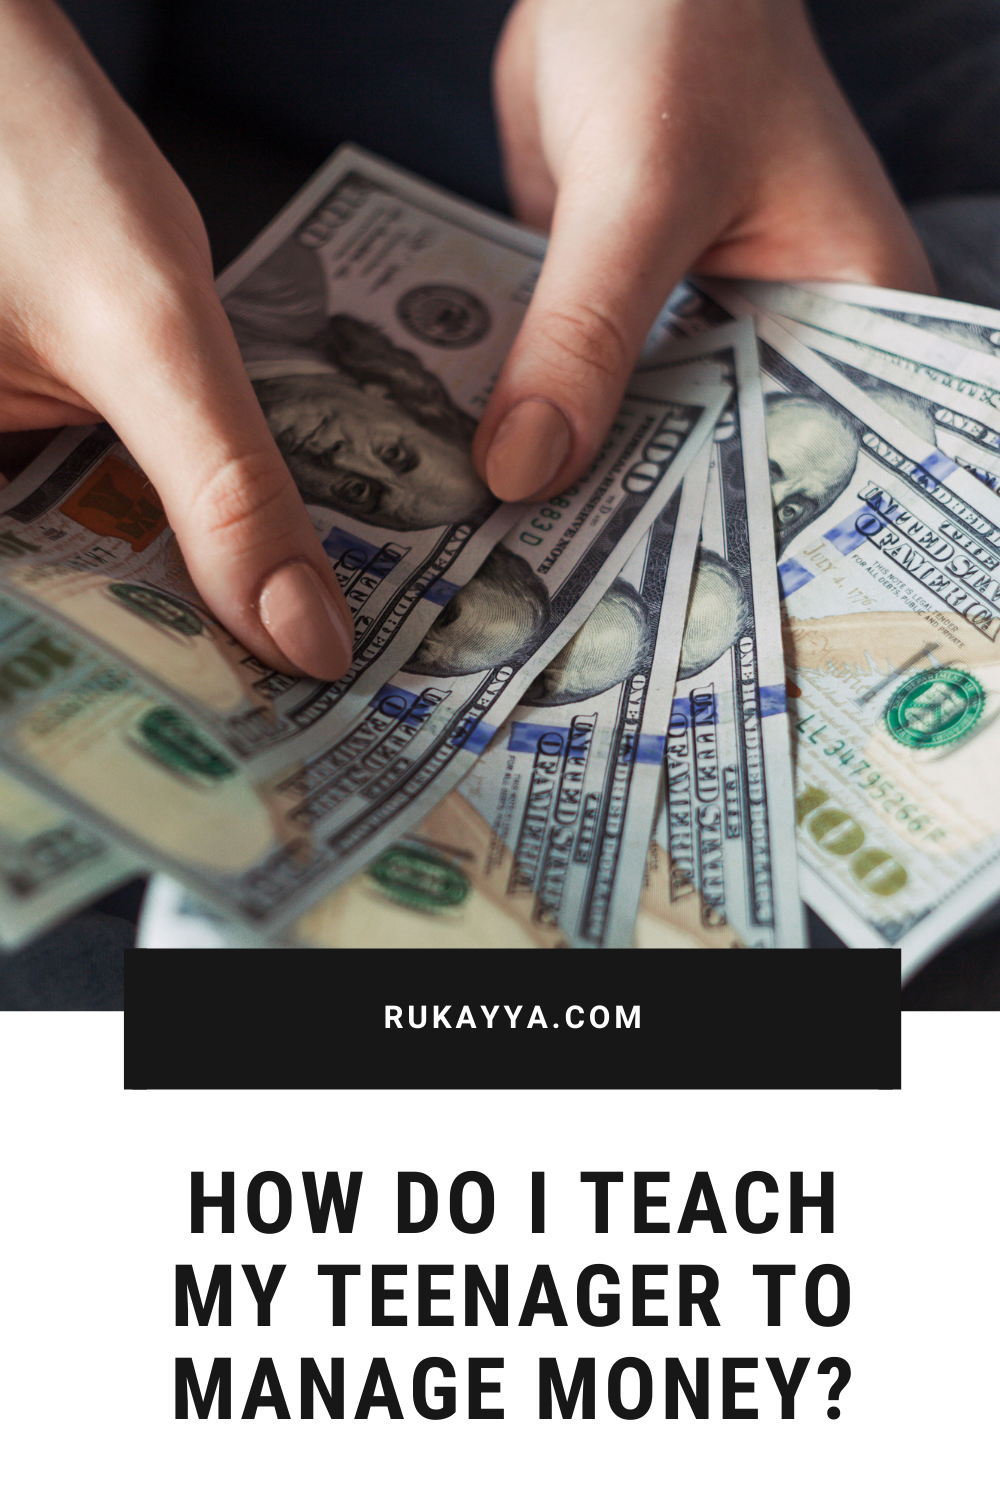 How Do I Teach My Teenager To Manage Money? 7 Useful Tips